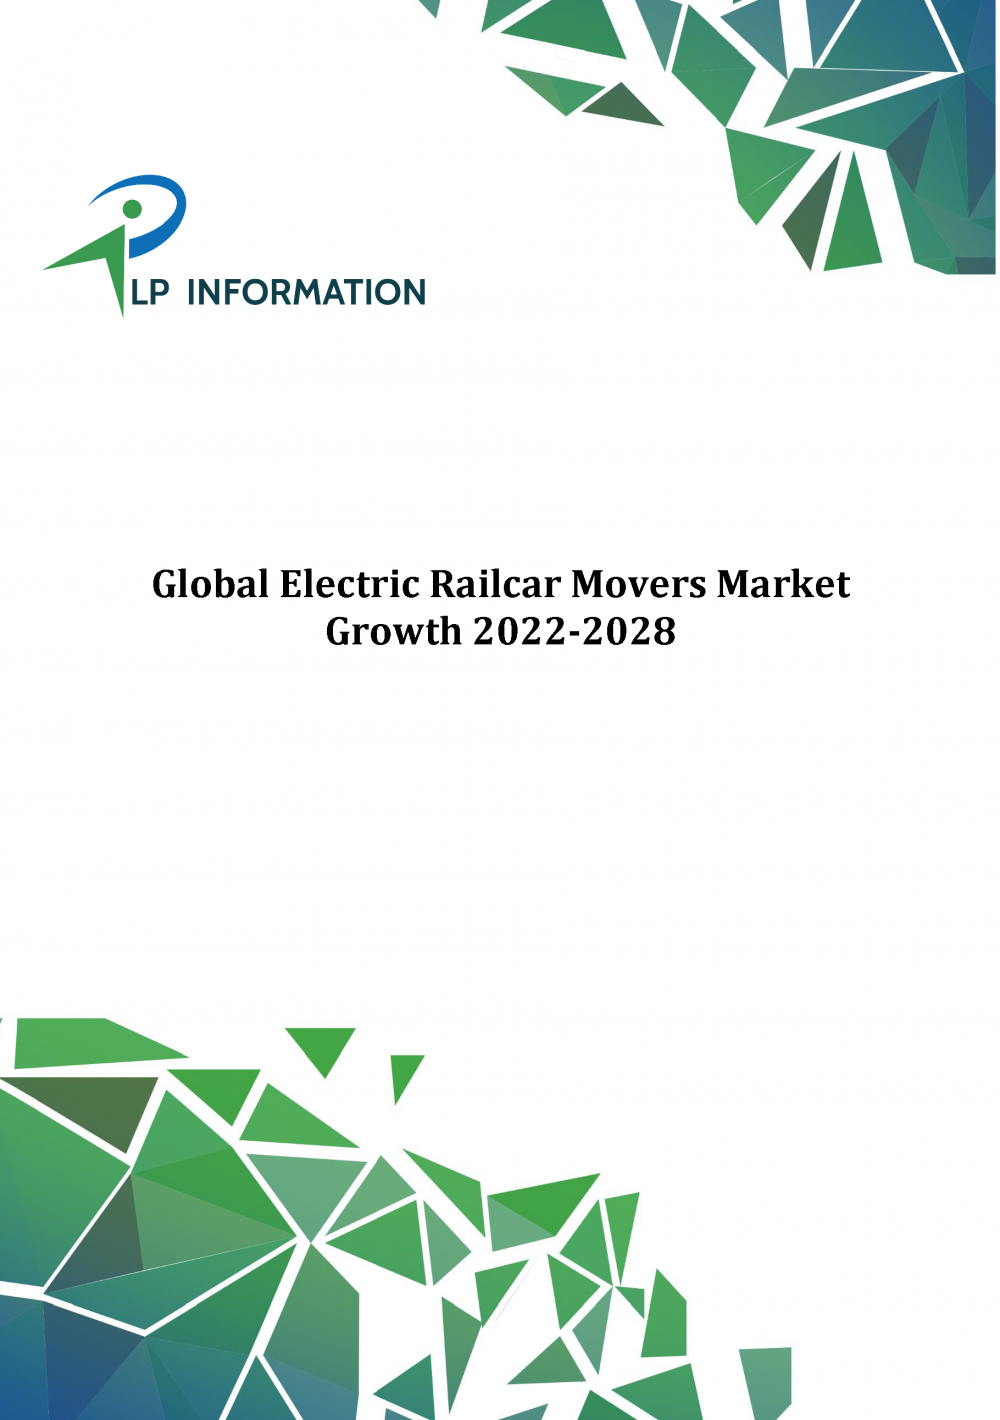 Global Electric Railcar Movers Market Growth 2022-2028